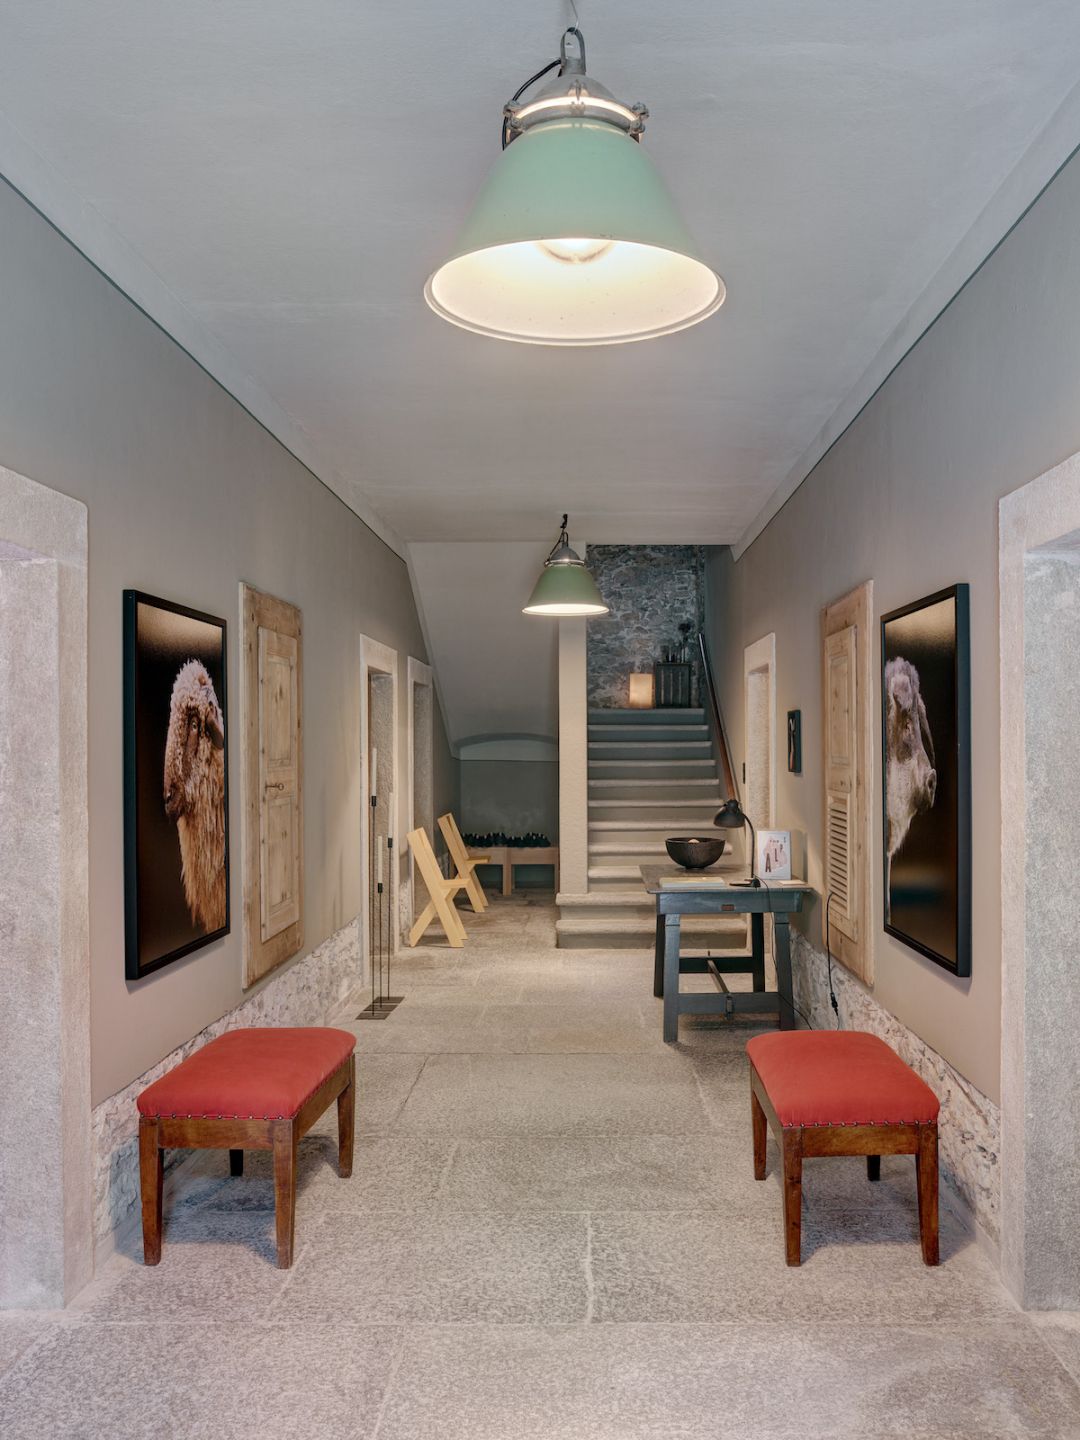 Design Guesthouse Gallery of the Pontisella, Stampa | The Aficionados